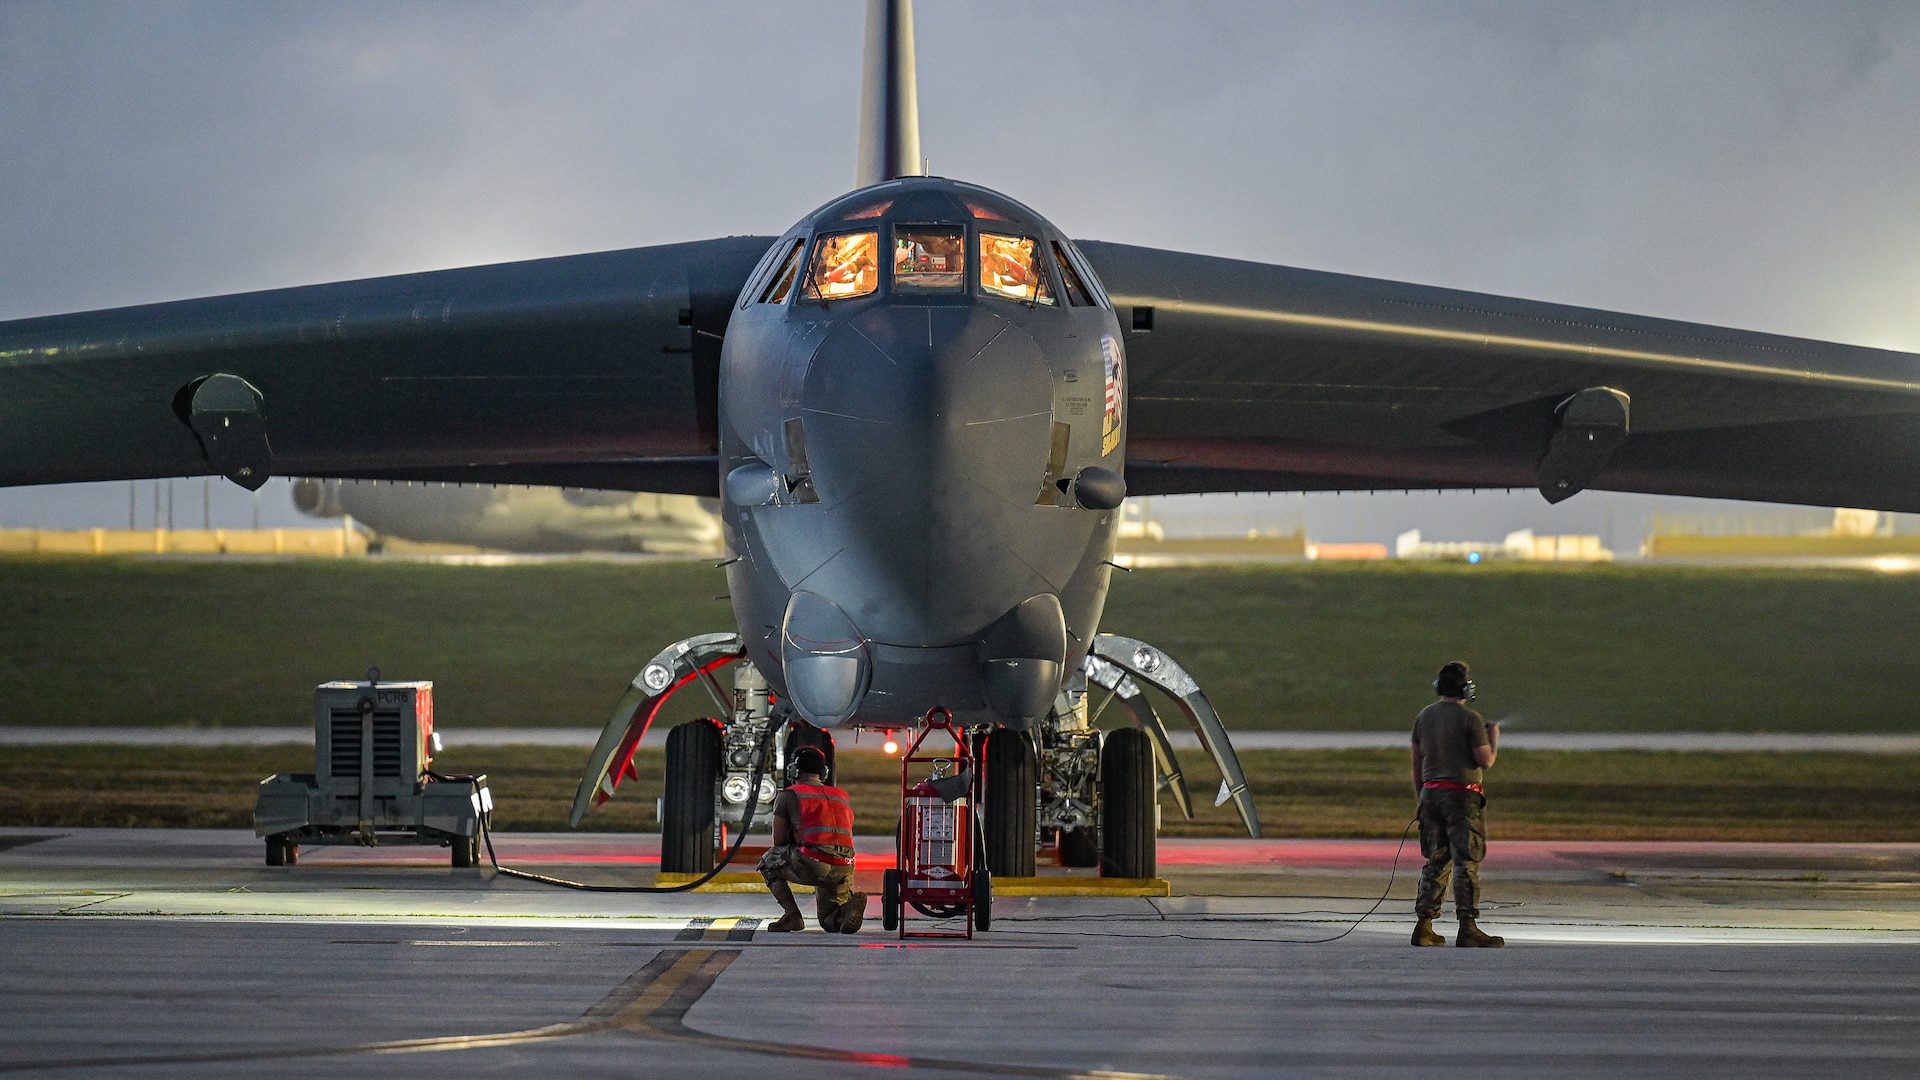 U.S. Air Force Airman 1st Class Lance Lynch, left, and Senior Airman Gregory Hogle, right, 96th Aircraft Maintenance Unit crew chiefs conduct a pre-flight inspection on a B-52H Stratofortress prior to take off from Andersen Air Force, Guam, to support a mission Mar. 4, 2022. Bomber missions contribute to joint force lethality and deter aggression in the Indo-Pacific by demonstrating USAF ability to operate anywhere in the world at any time in support of the National Defense Strategy. (U.S. Air Force photo by Senior Airman Jonathan E. Ramos)